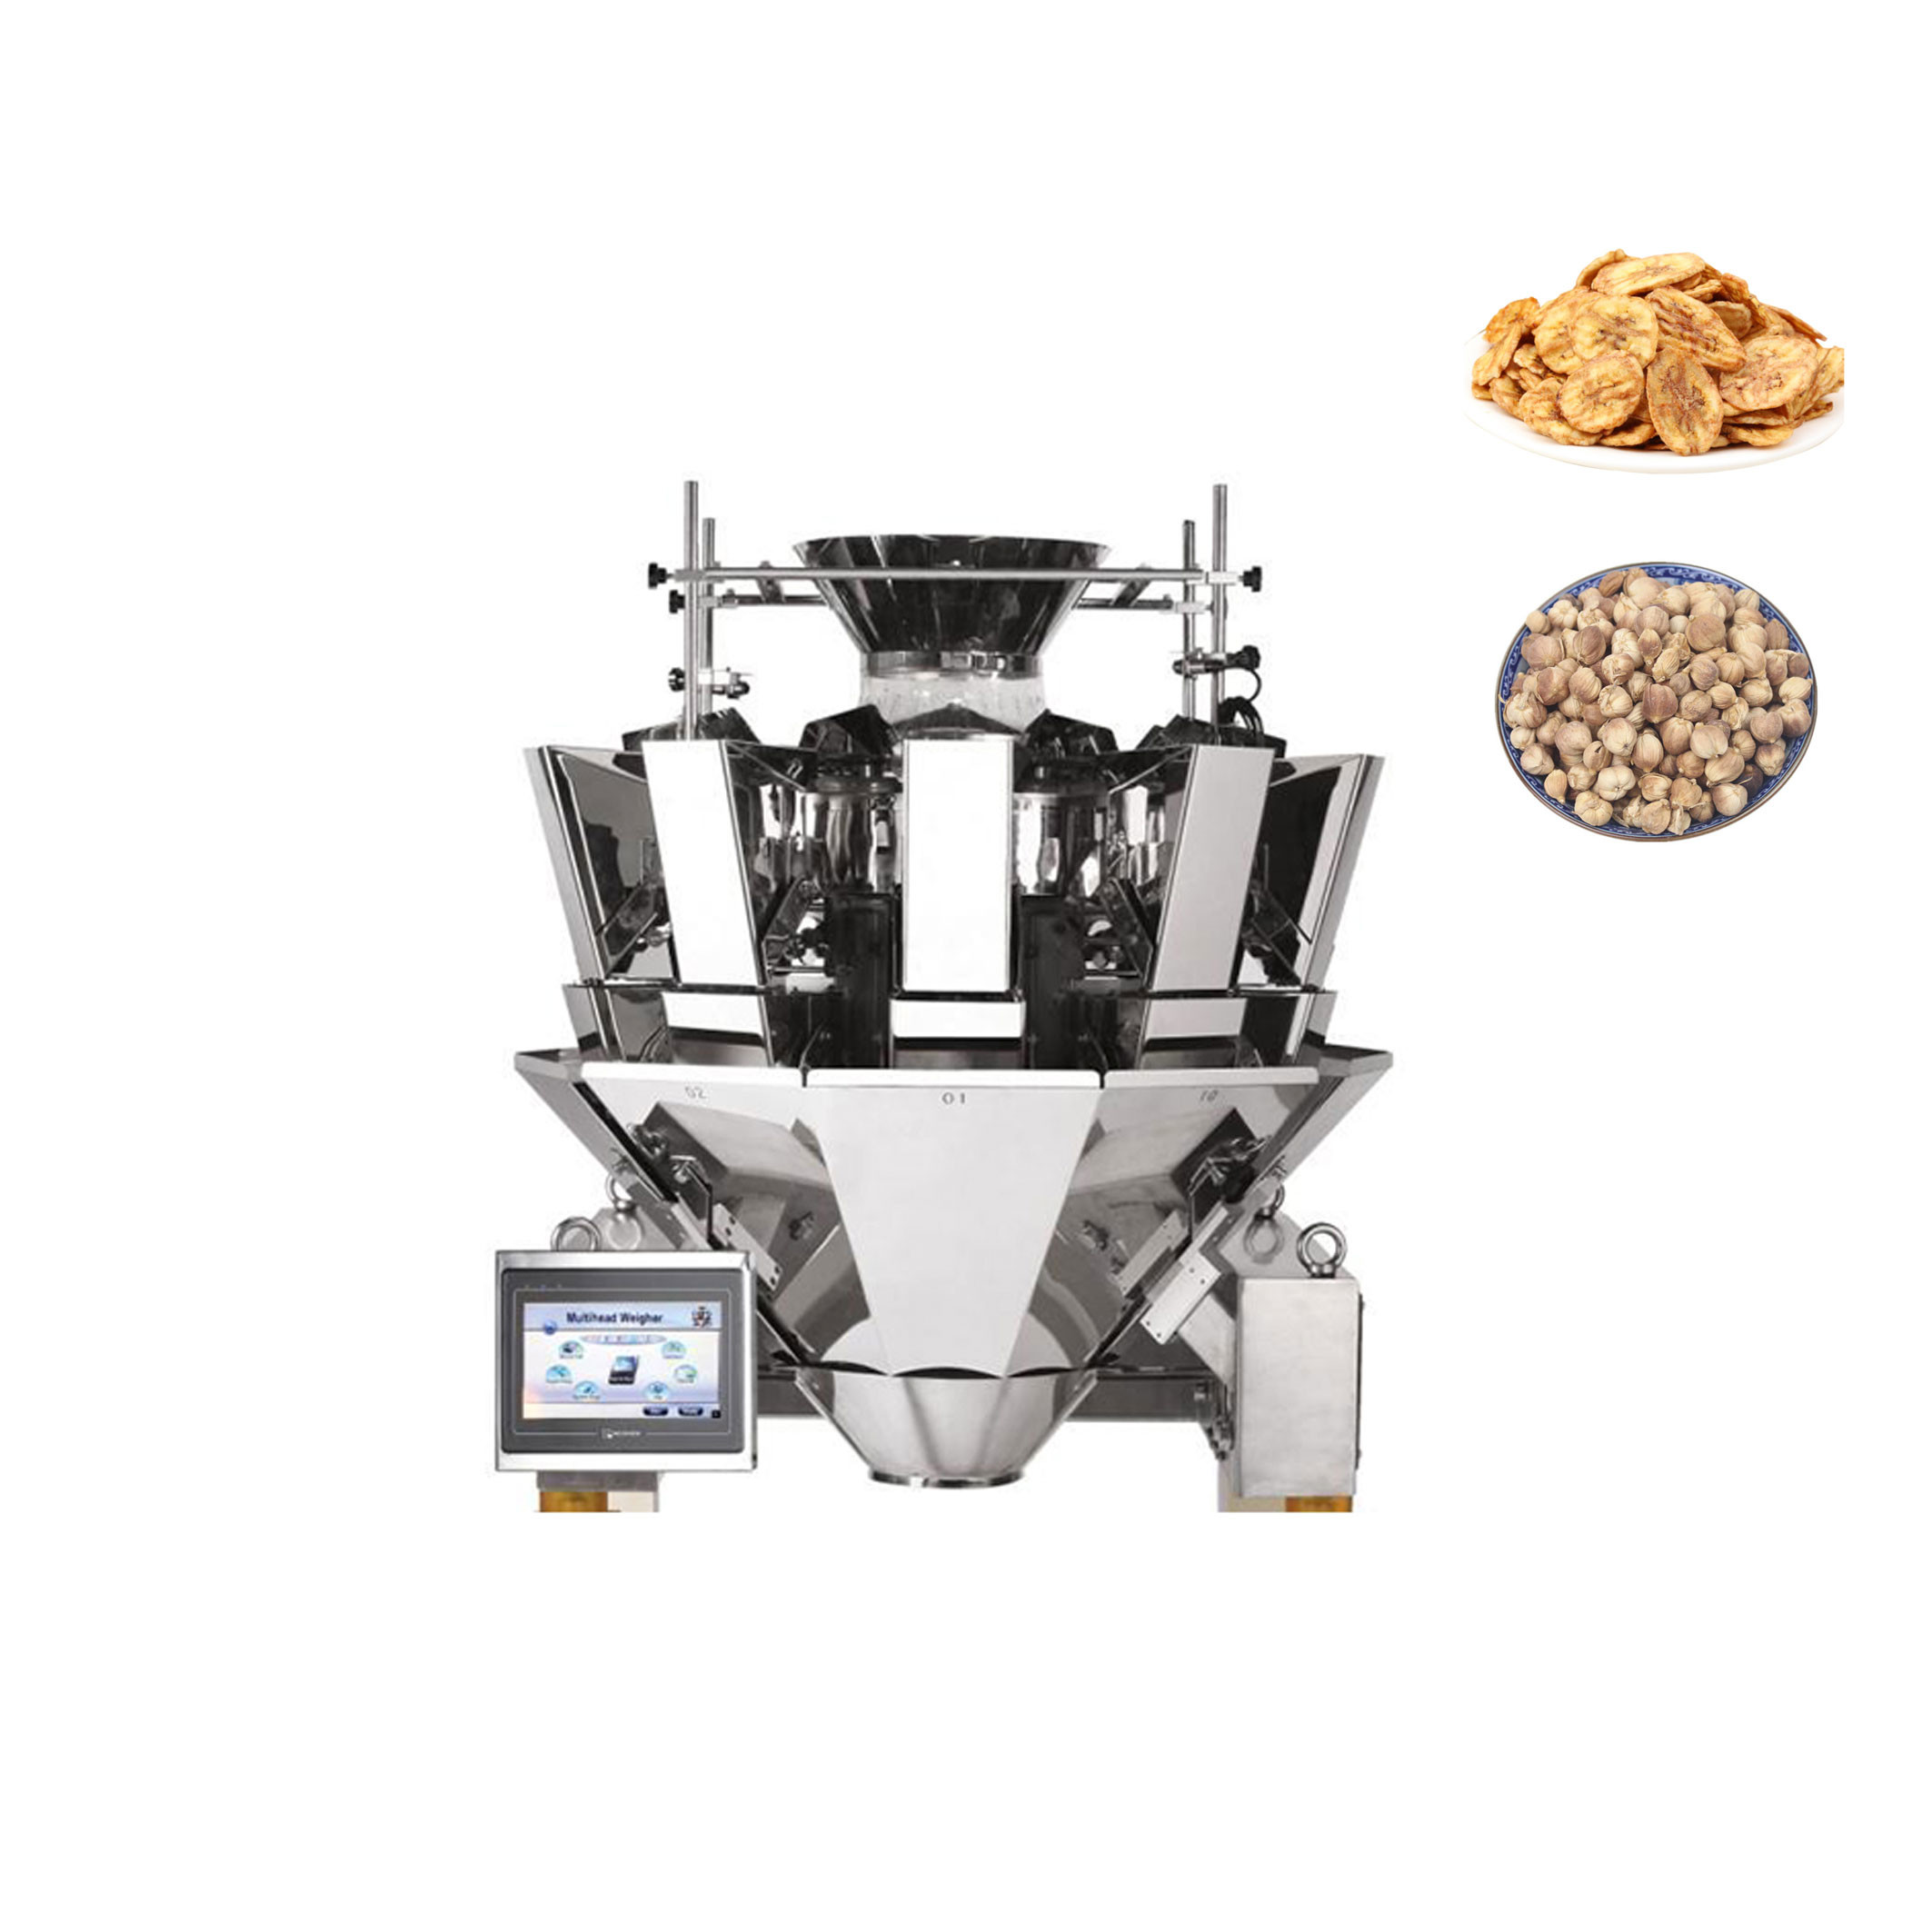 China Frozen Food Banana Chips Spice Multihead Weigher Automatic wholesale